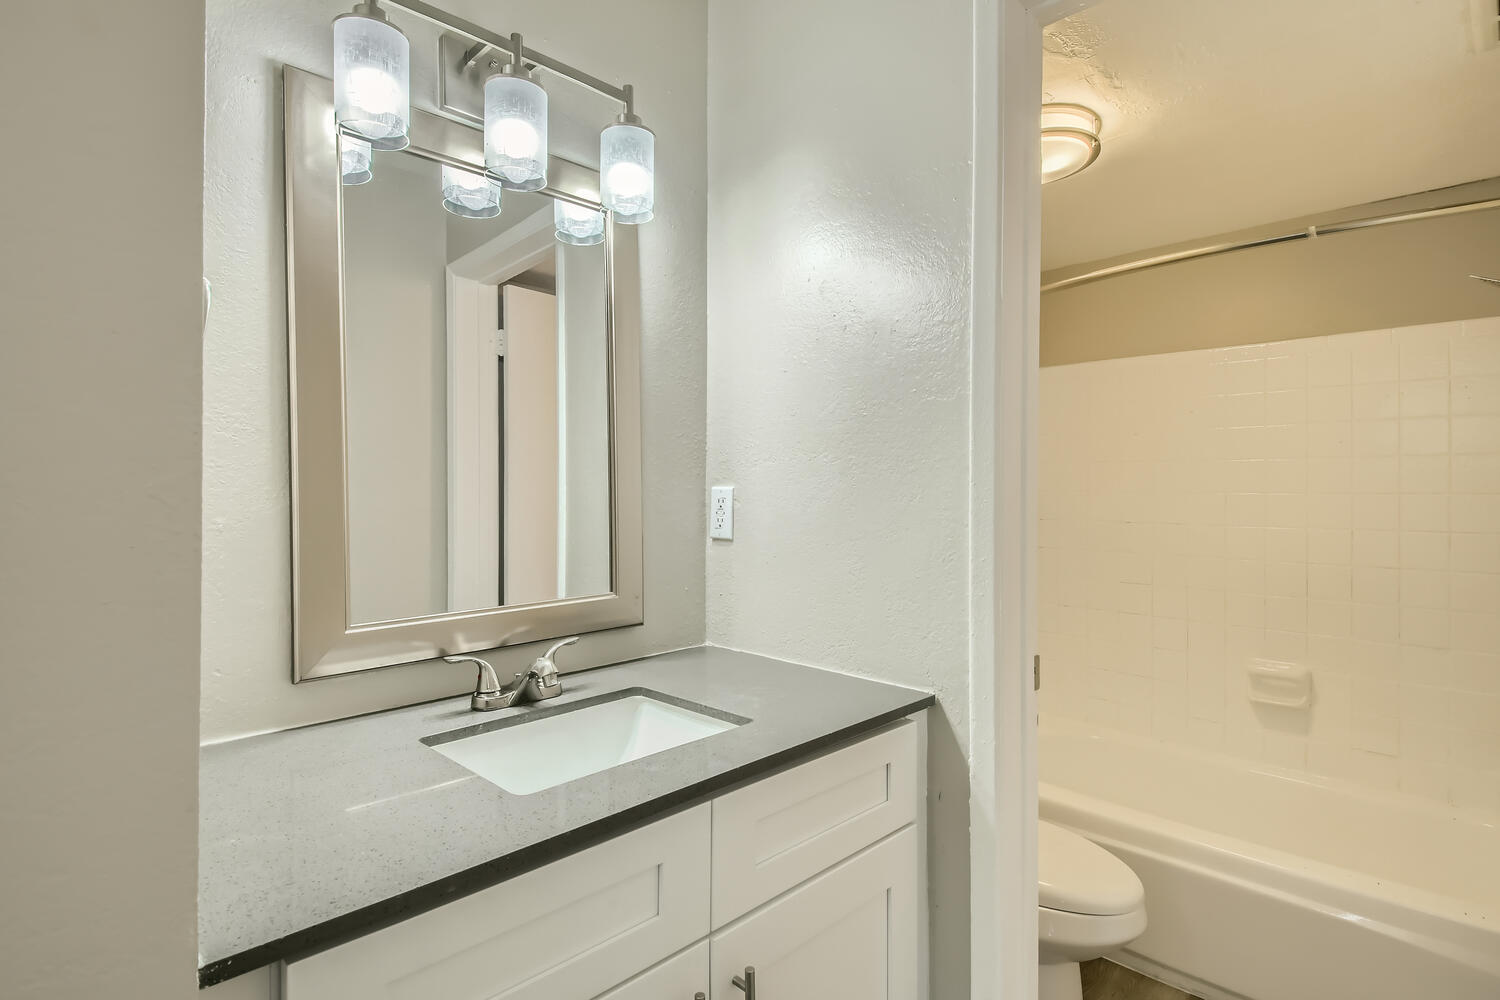 Rise at the Palms apartment bathroom with a quartz countertop and a tub in a separate room. 